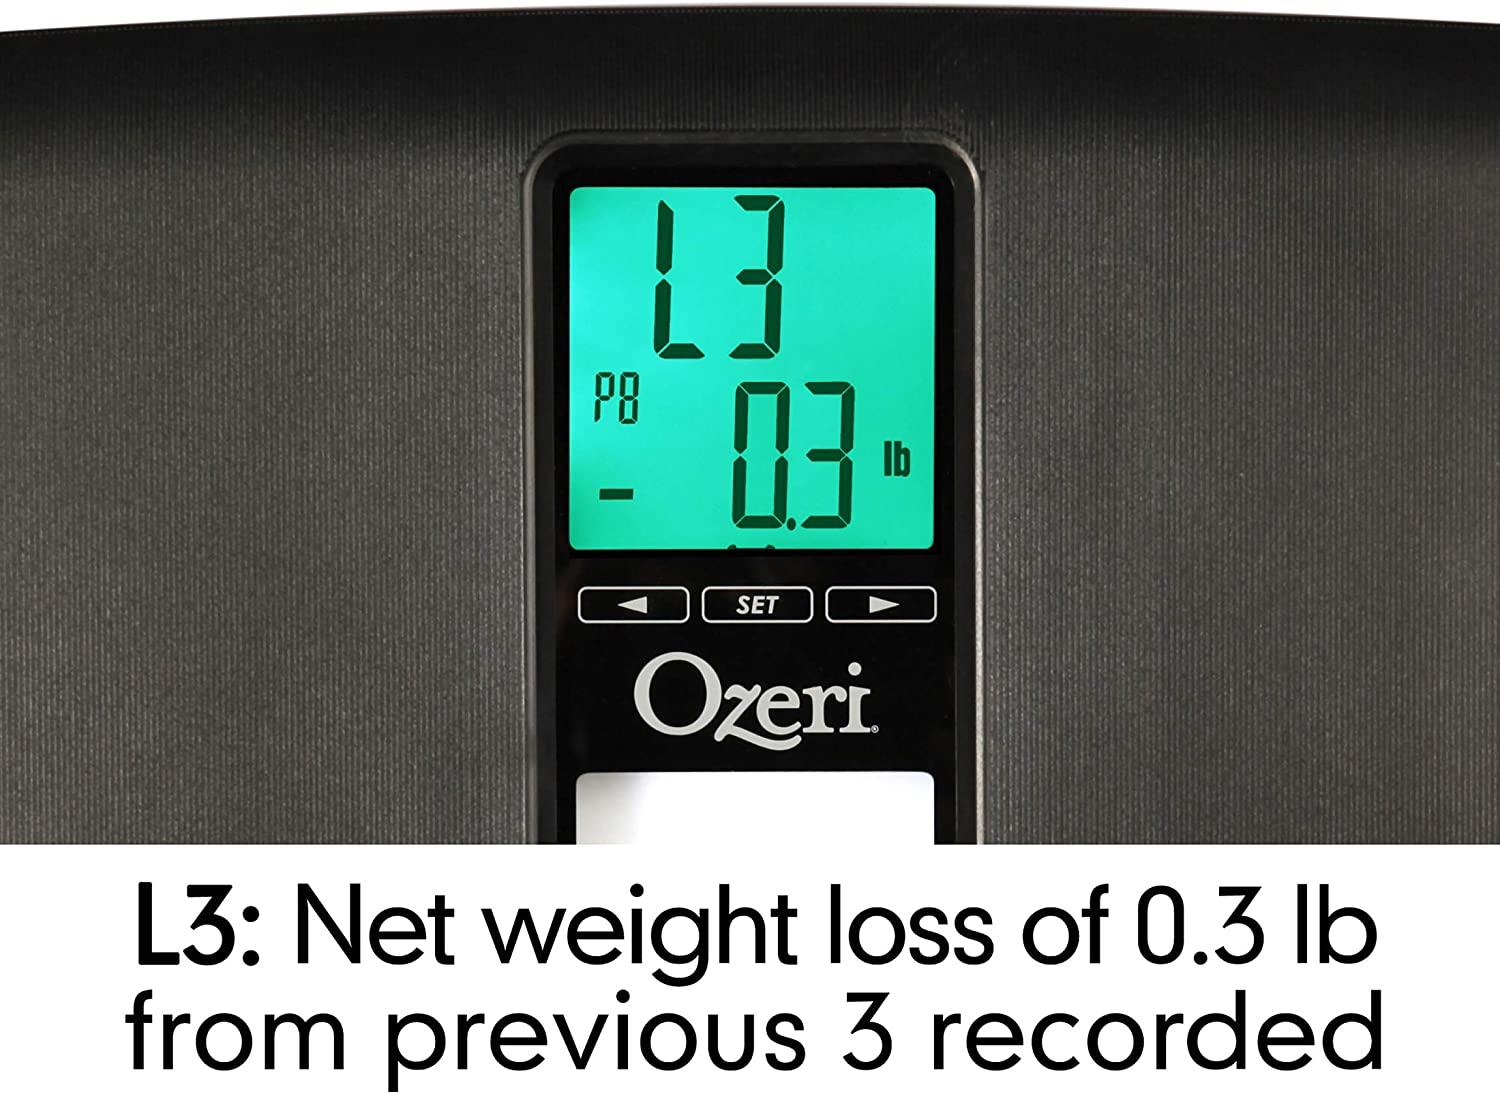 Ozeri Precision II Digital Bathroom Scale (440 lbs Capacity), with Weight Change Detection